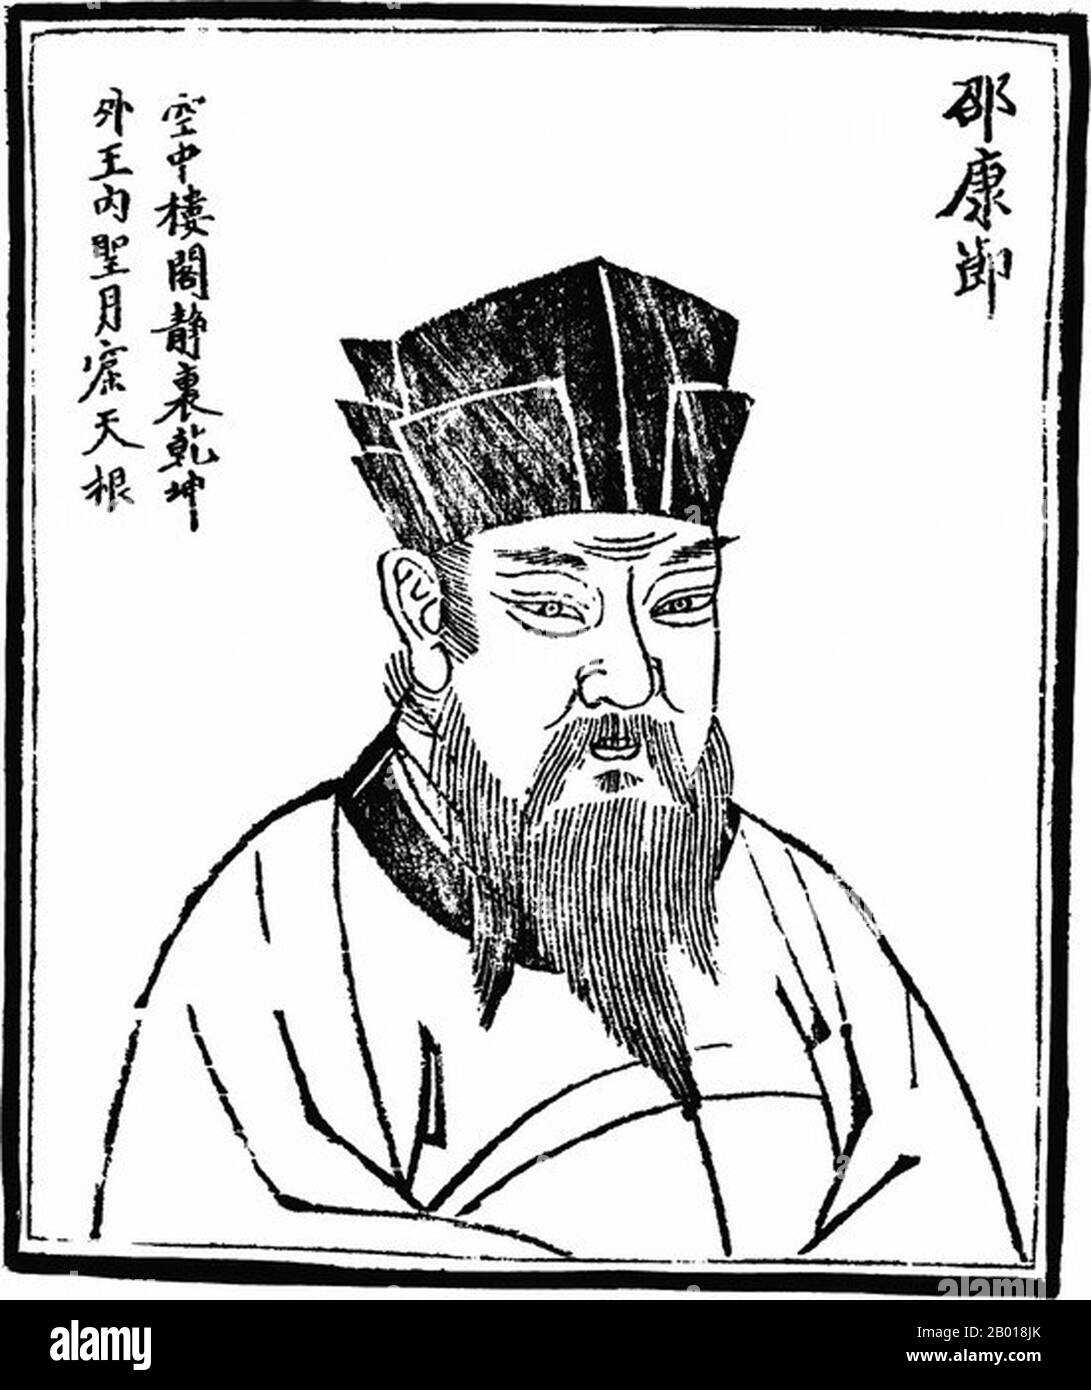 China: Shao Yong (1011-1077), Song Dynasty philosopher, cosmologist, poet and historian who influenced the development of Neo-Confucianism. Woodblock print from 'Images of Ancient People in History', c. 1498.  Shao Yong, also named Shao Kangjie and courtesy name Yaofu, was a member of a group of thinkers who gathered in Luoyang toward the last three decades of the 11th century. This group had two primary objectives. One of these was to draw parallels between their own streams of thought and that of Confucianism as understood by Mencius. Stock Photo